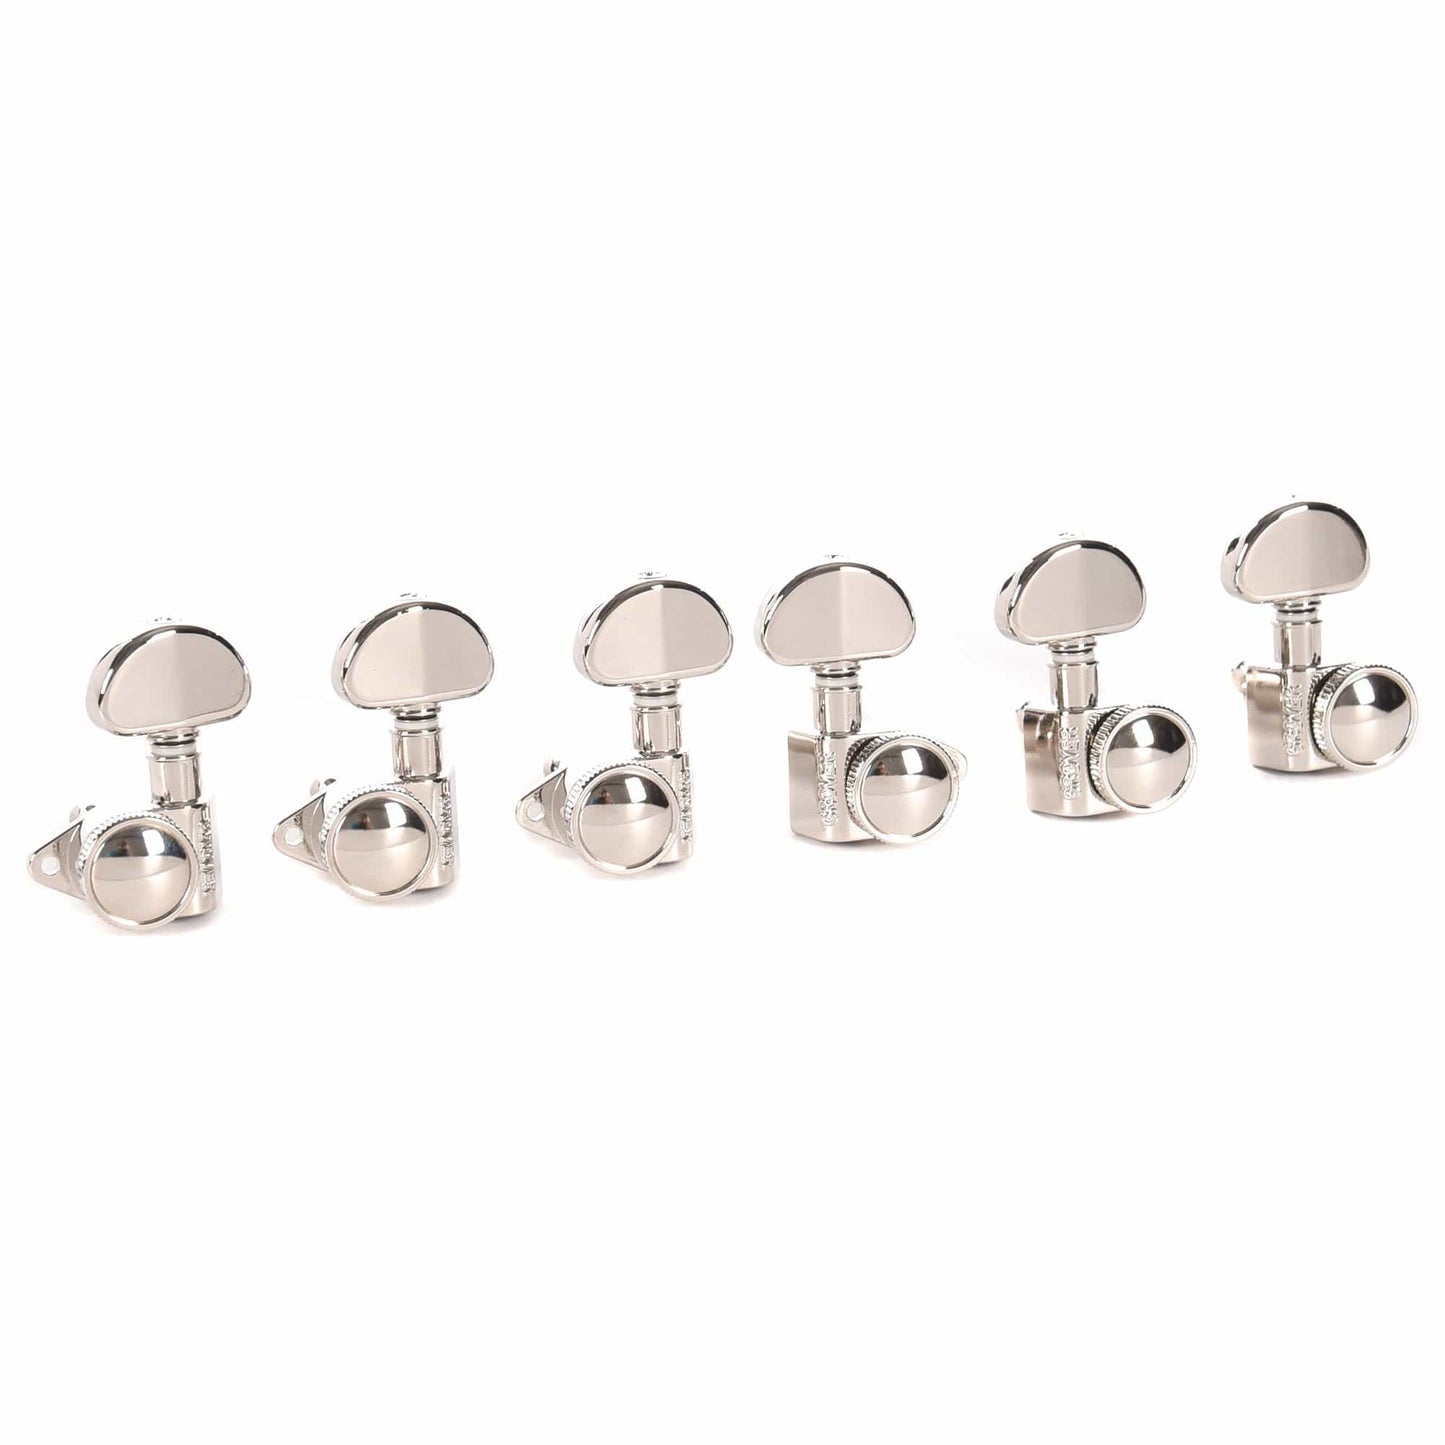 Grover 502 Series 3x3 Locking Tuners Nickel Parts / Tuning Heads